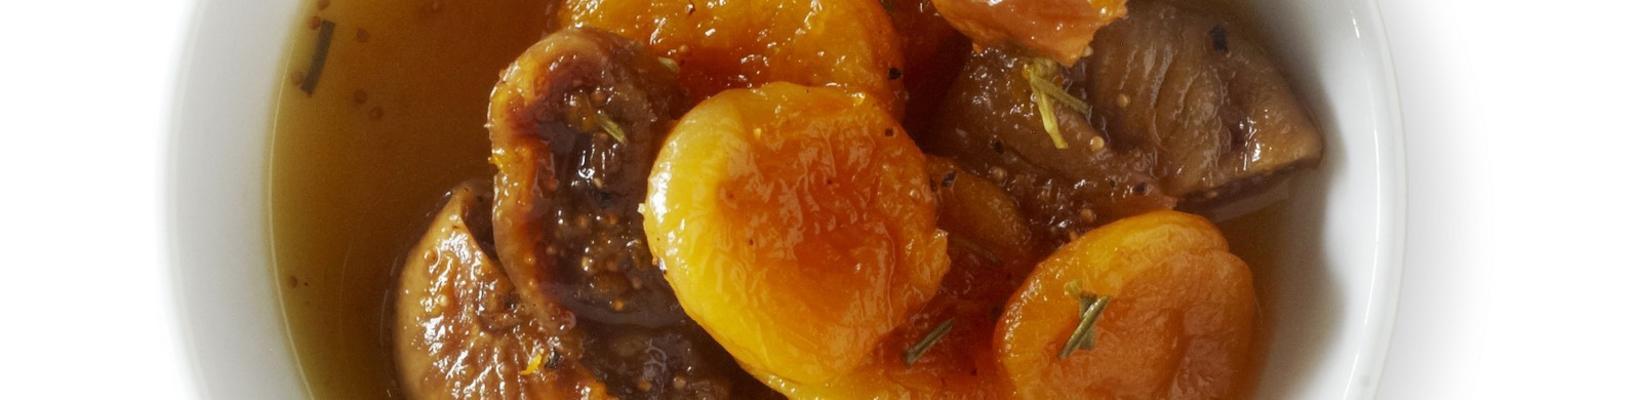 figs and apricots with orange and rosemary